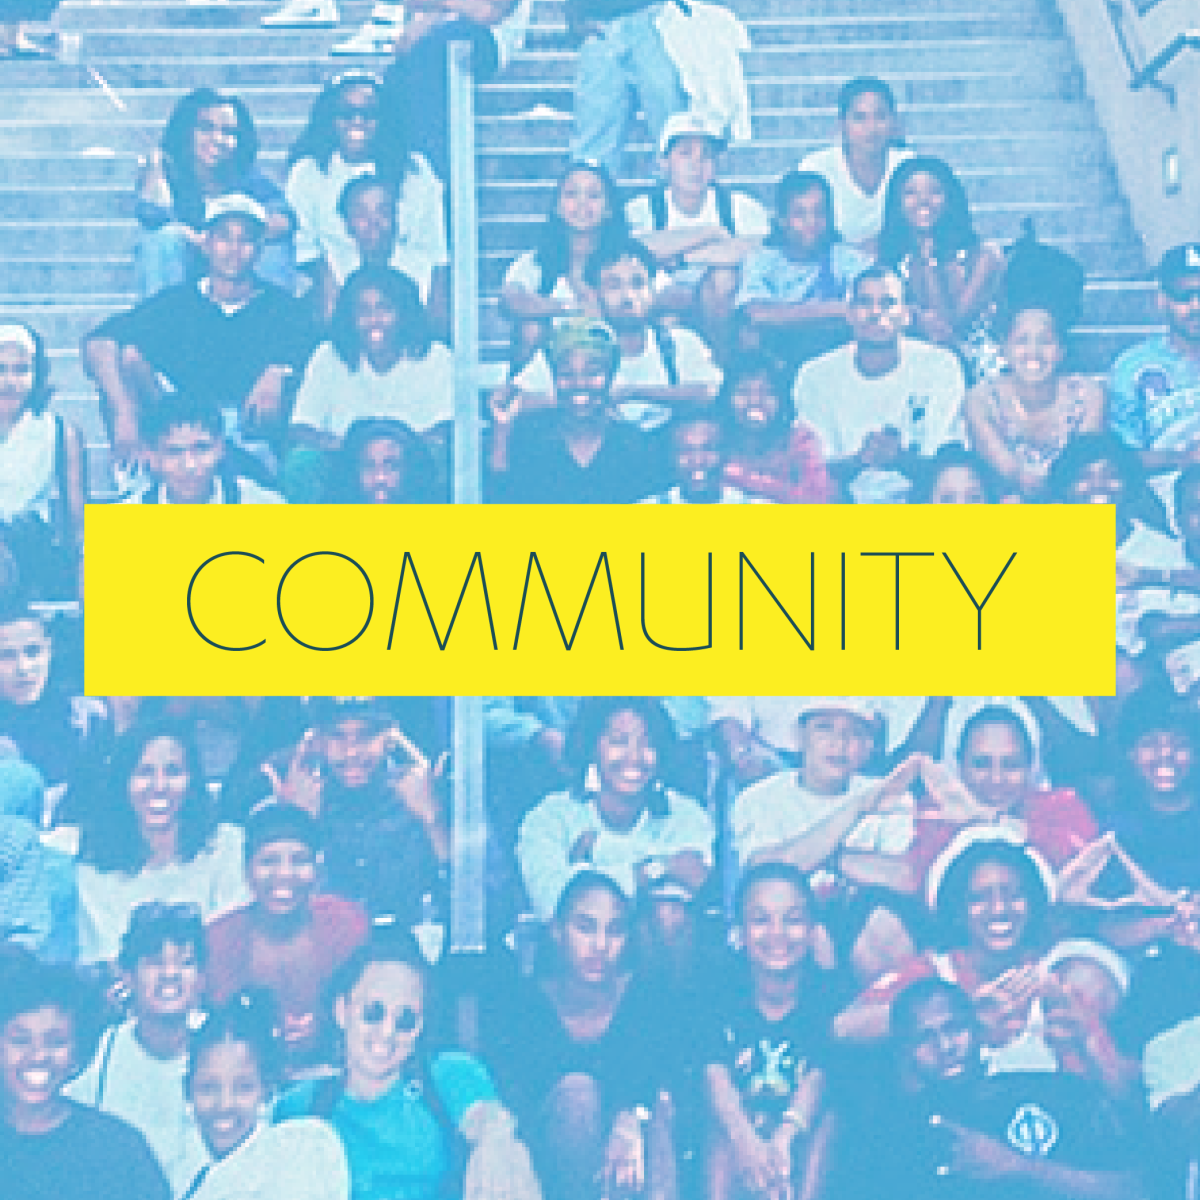 Click here to learn more about the Black Bruin community at UCLA